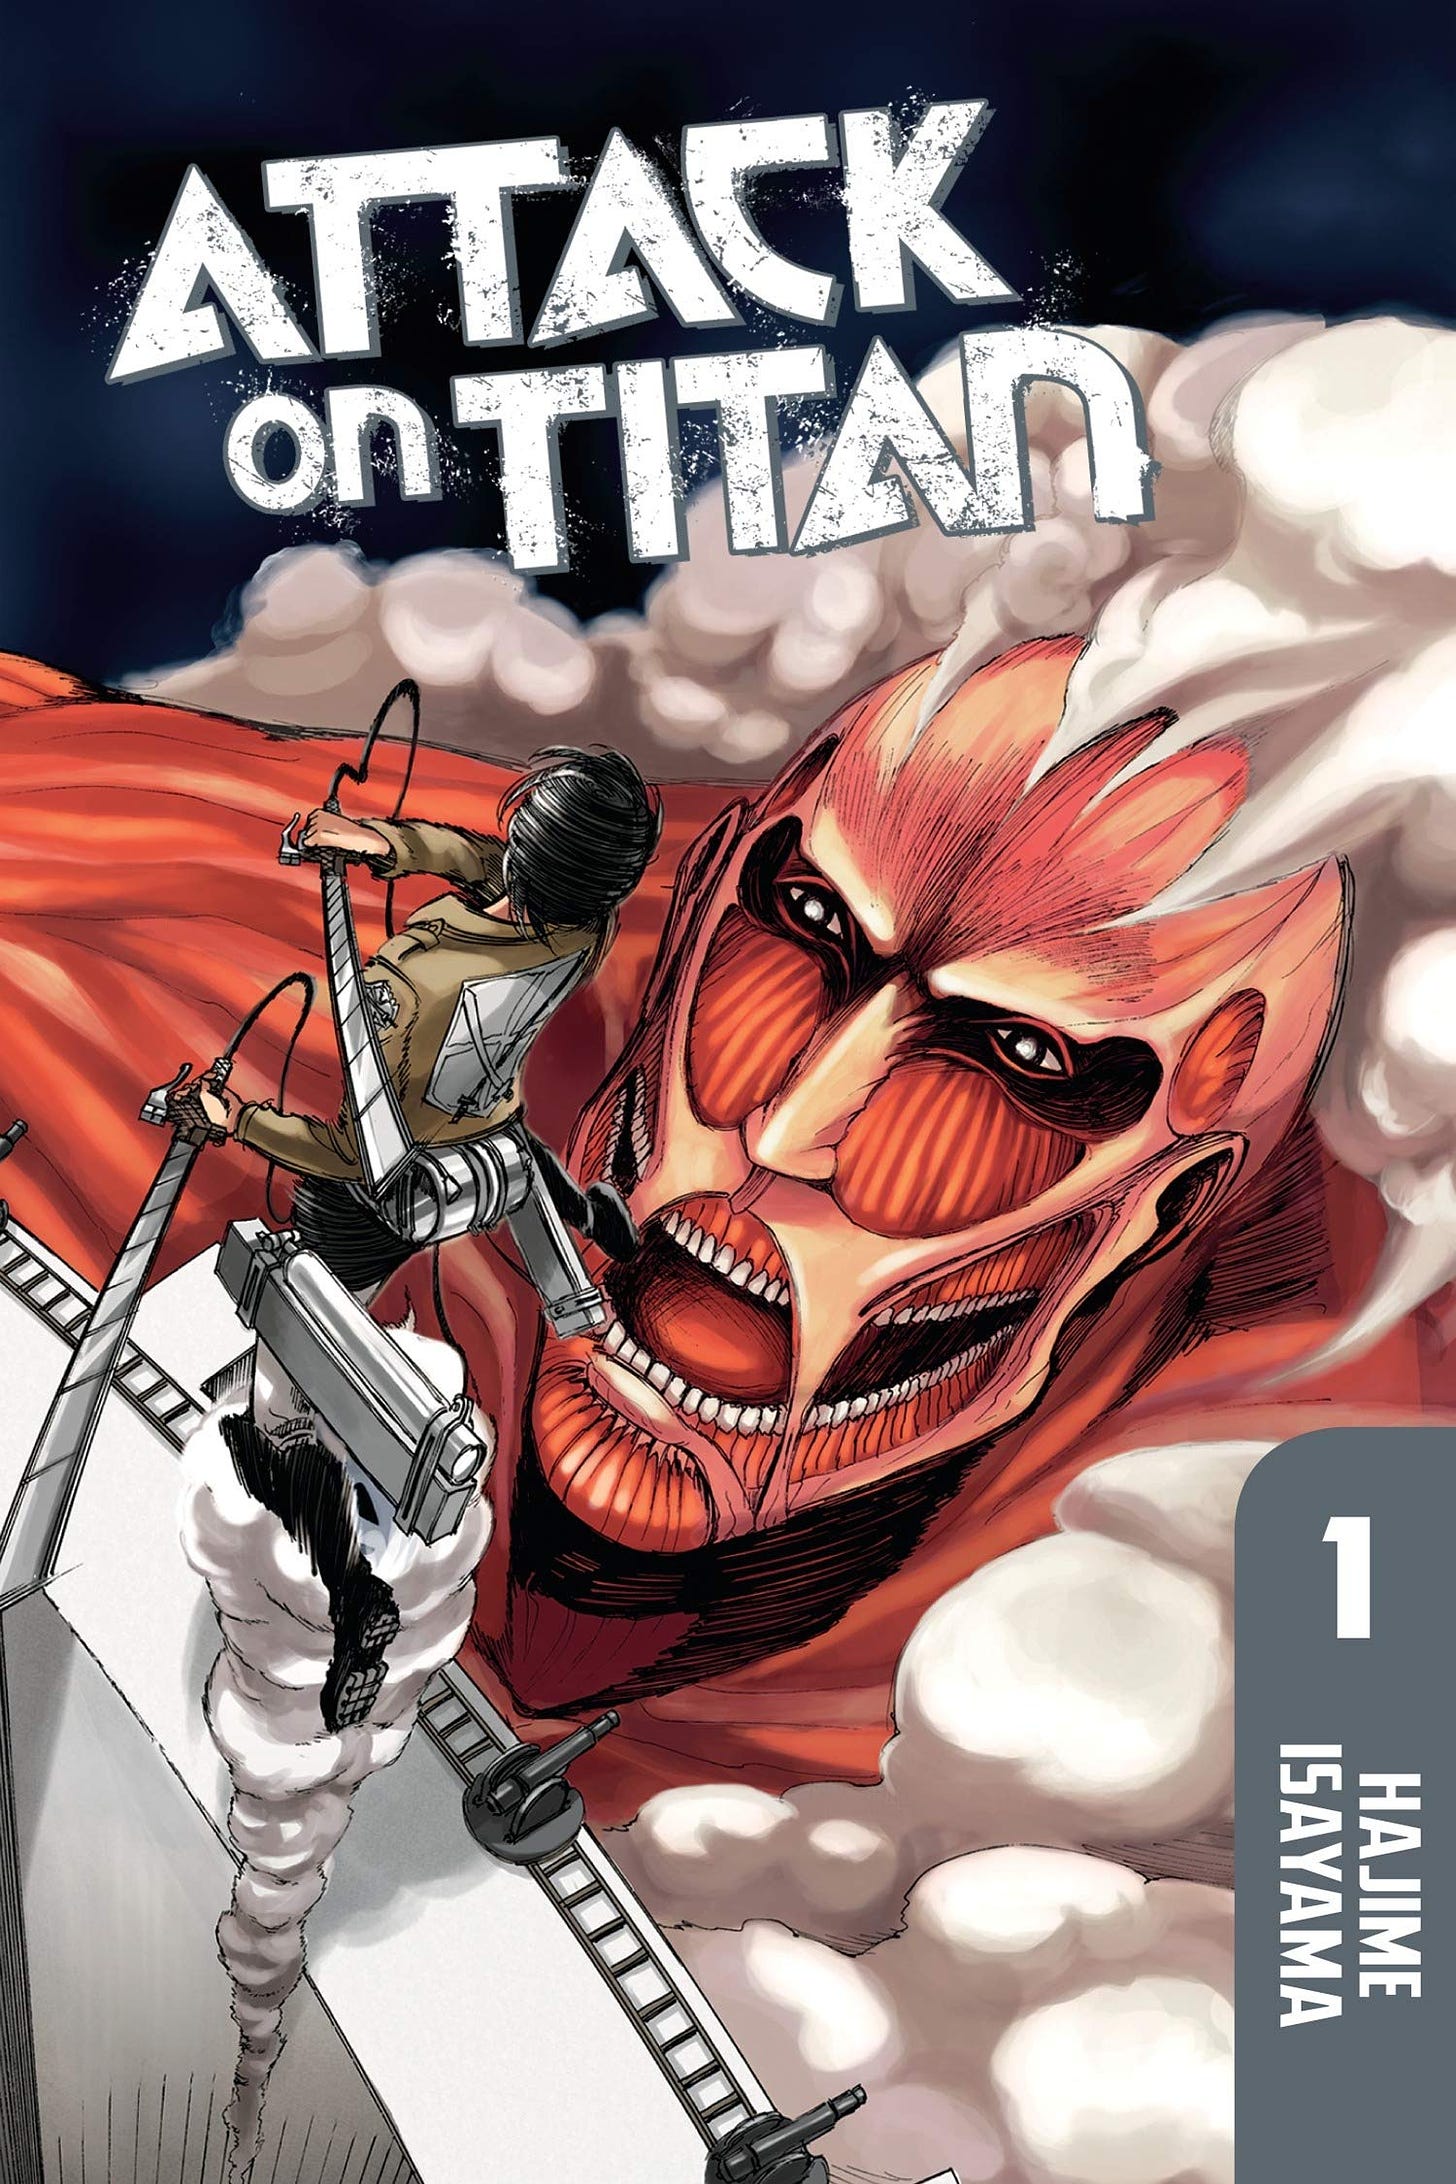 Buy Attack on Titan 1 Book Online at Low Prices in India | Attack on Titan  1 Reviews & Ratings - Amazon.in